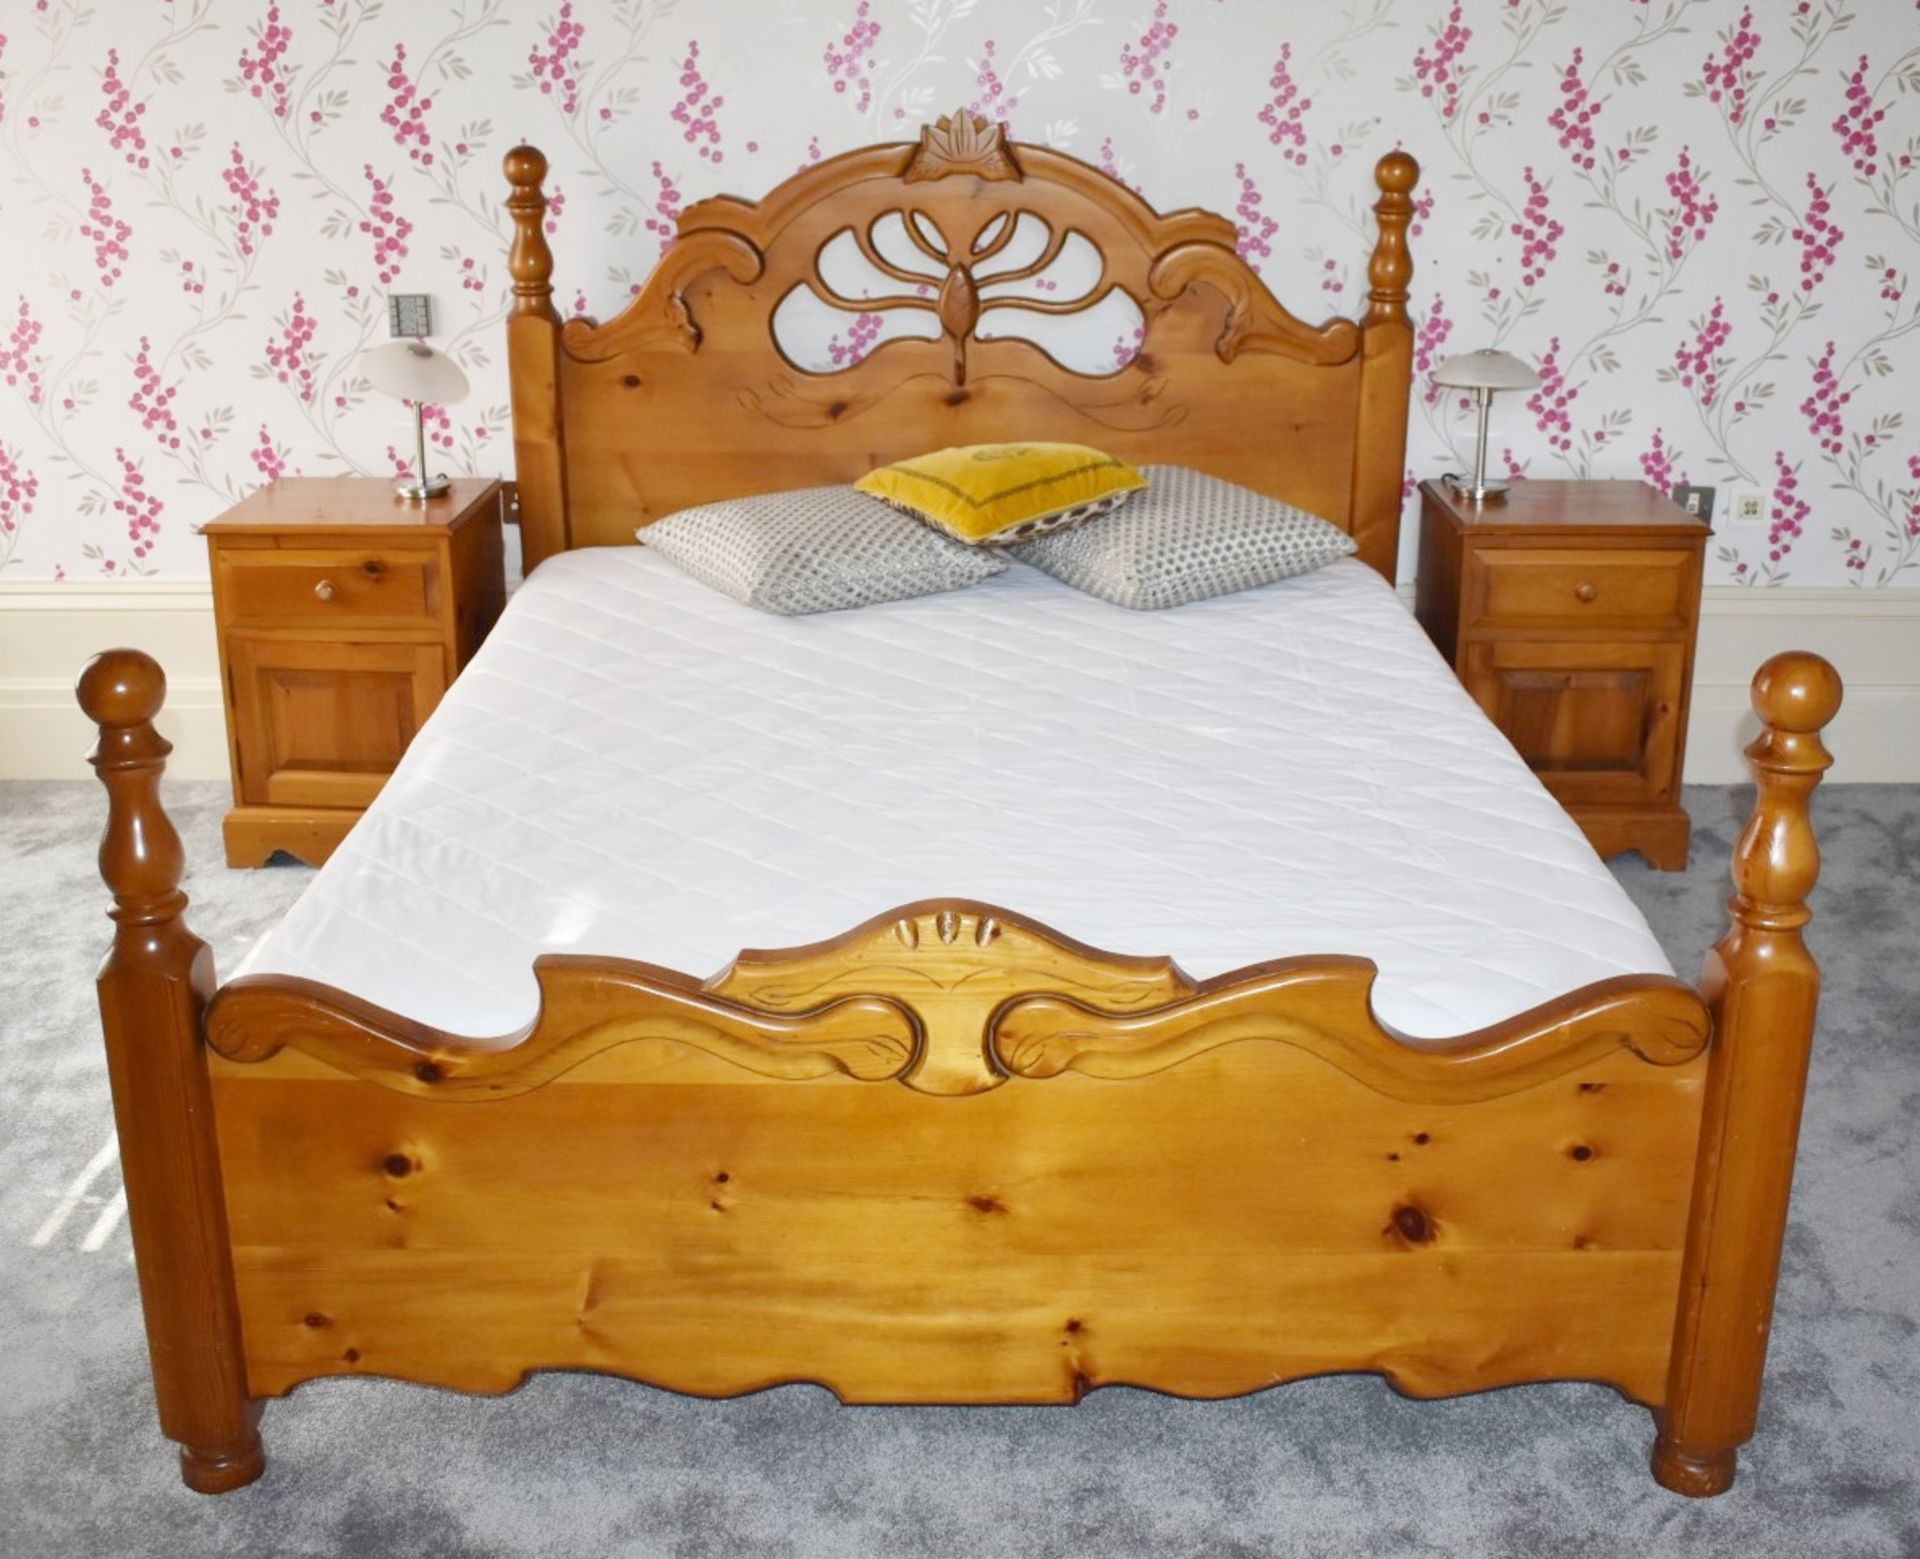 1 x Country Farmhouse Solid Pine Kingsize Bed Frame Featuring An Ornate Headboard & Footboard - NO - Image 3 of 7